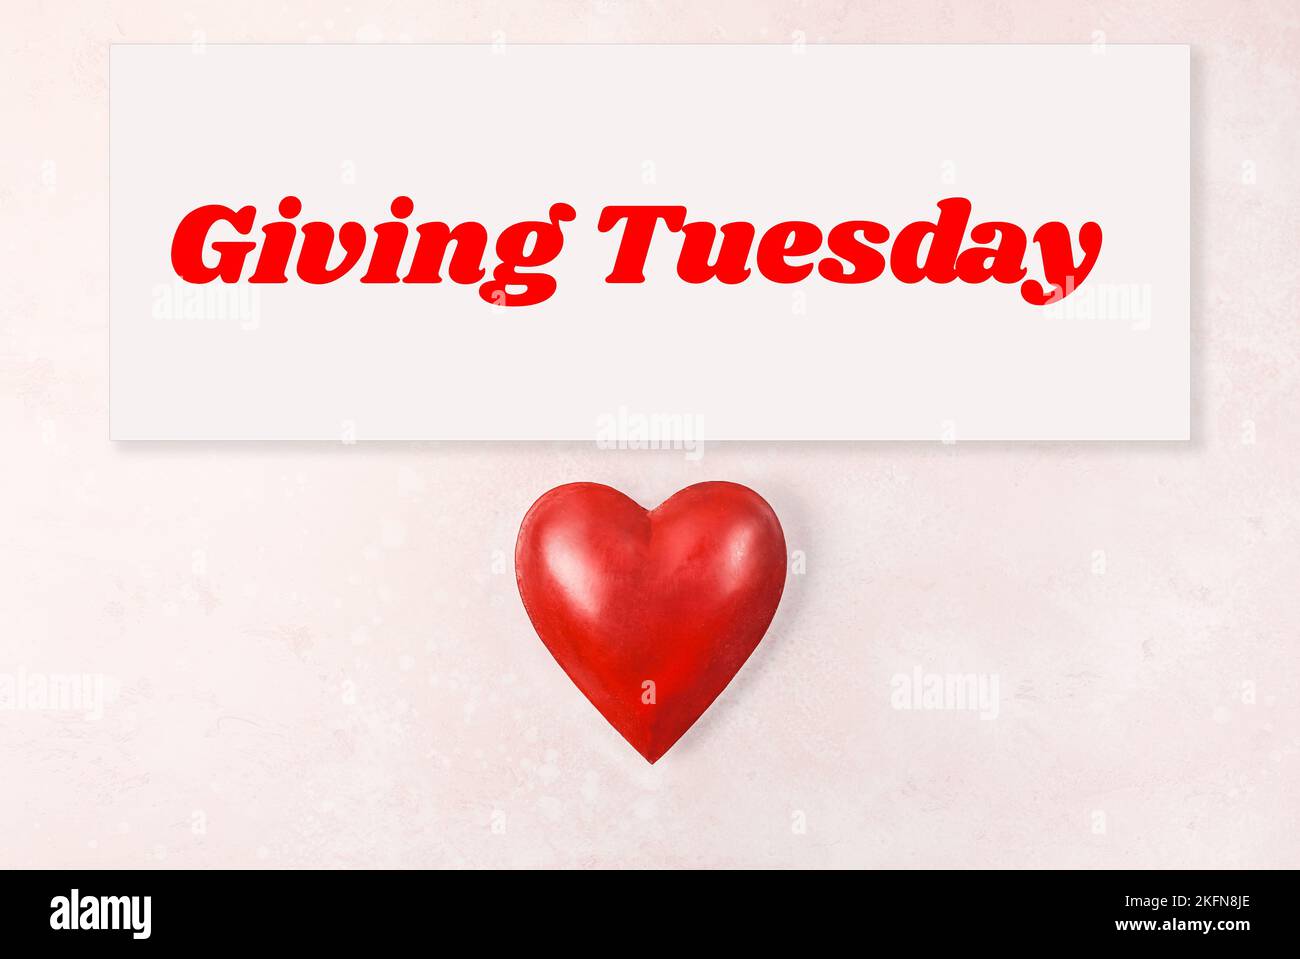 Giving Tuesday is a global day of charitable giving after Black Friday shopping day. Charity, give help, donations and support concept with text messa Stock Photo